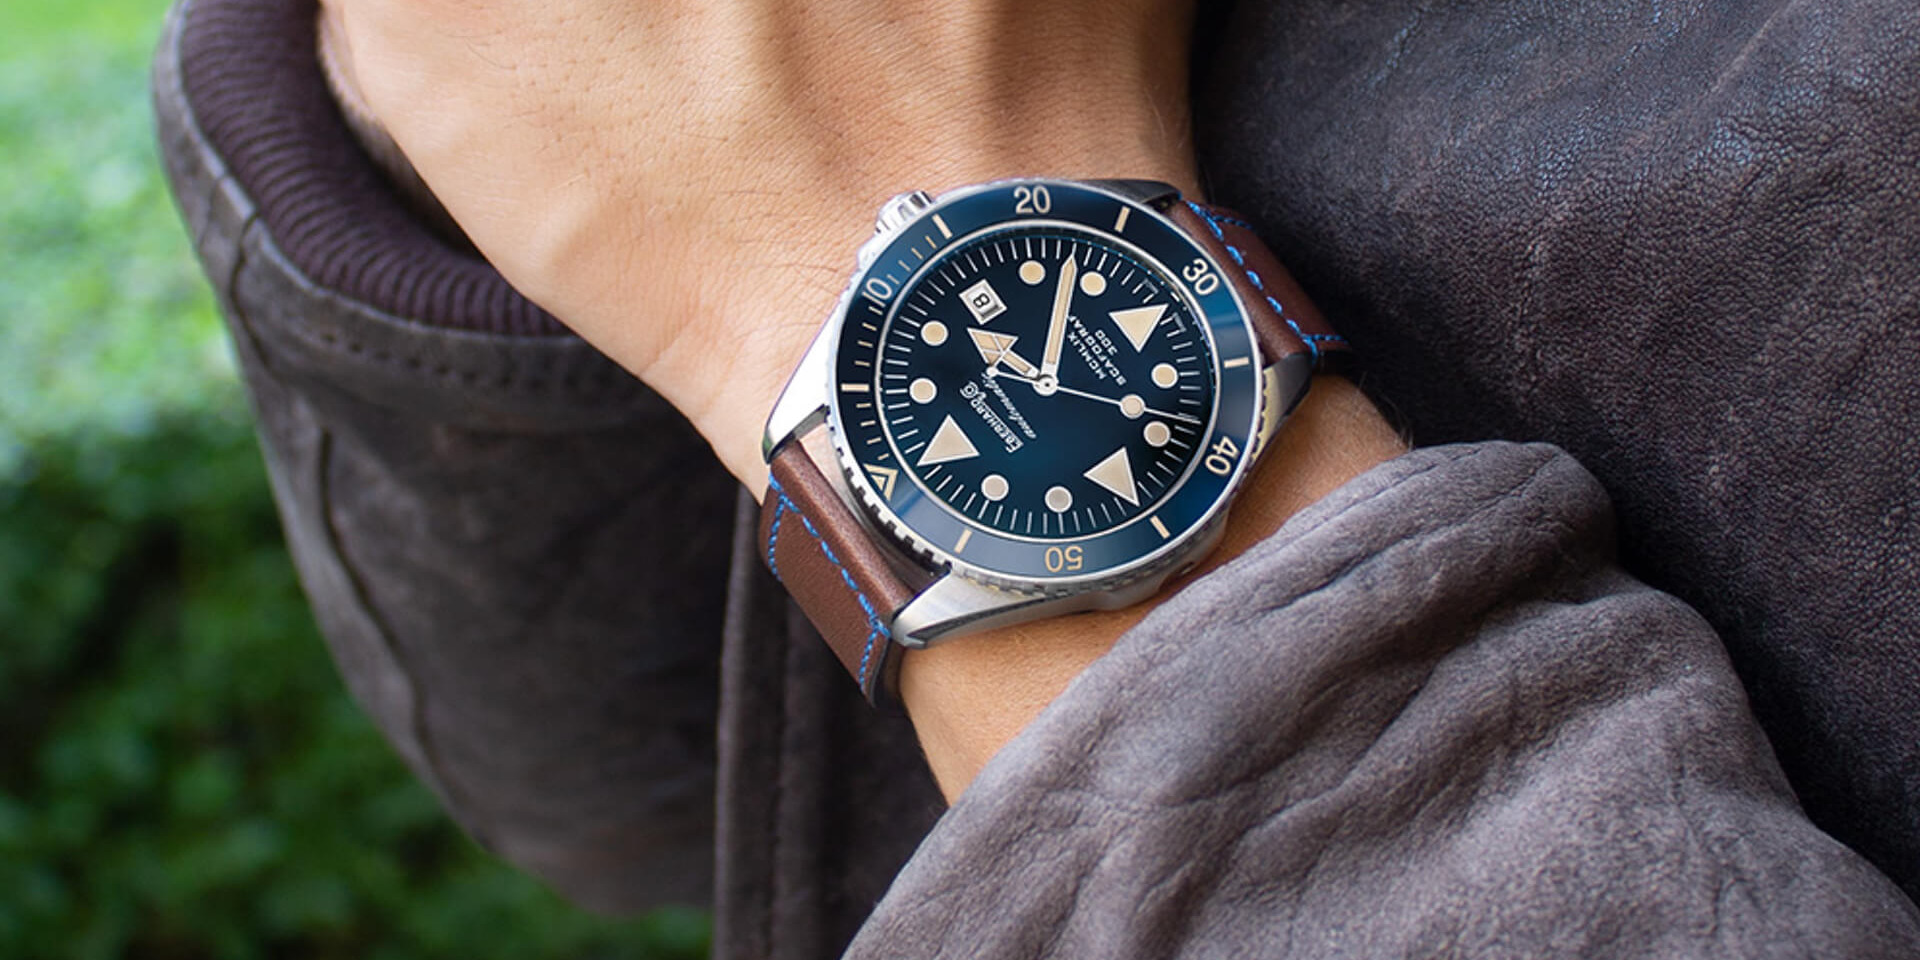 New Noble Designs: Eberhard & Co. Presents the Scafograf 300 “MCMLIX” Watch in a New Guise